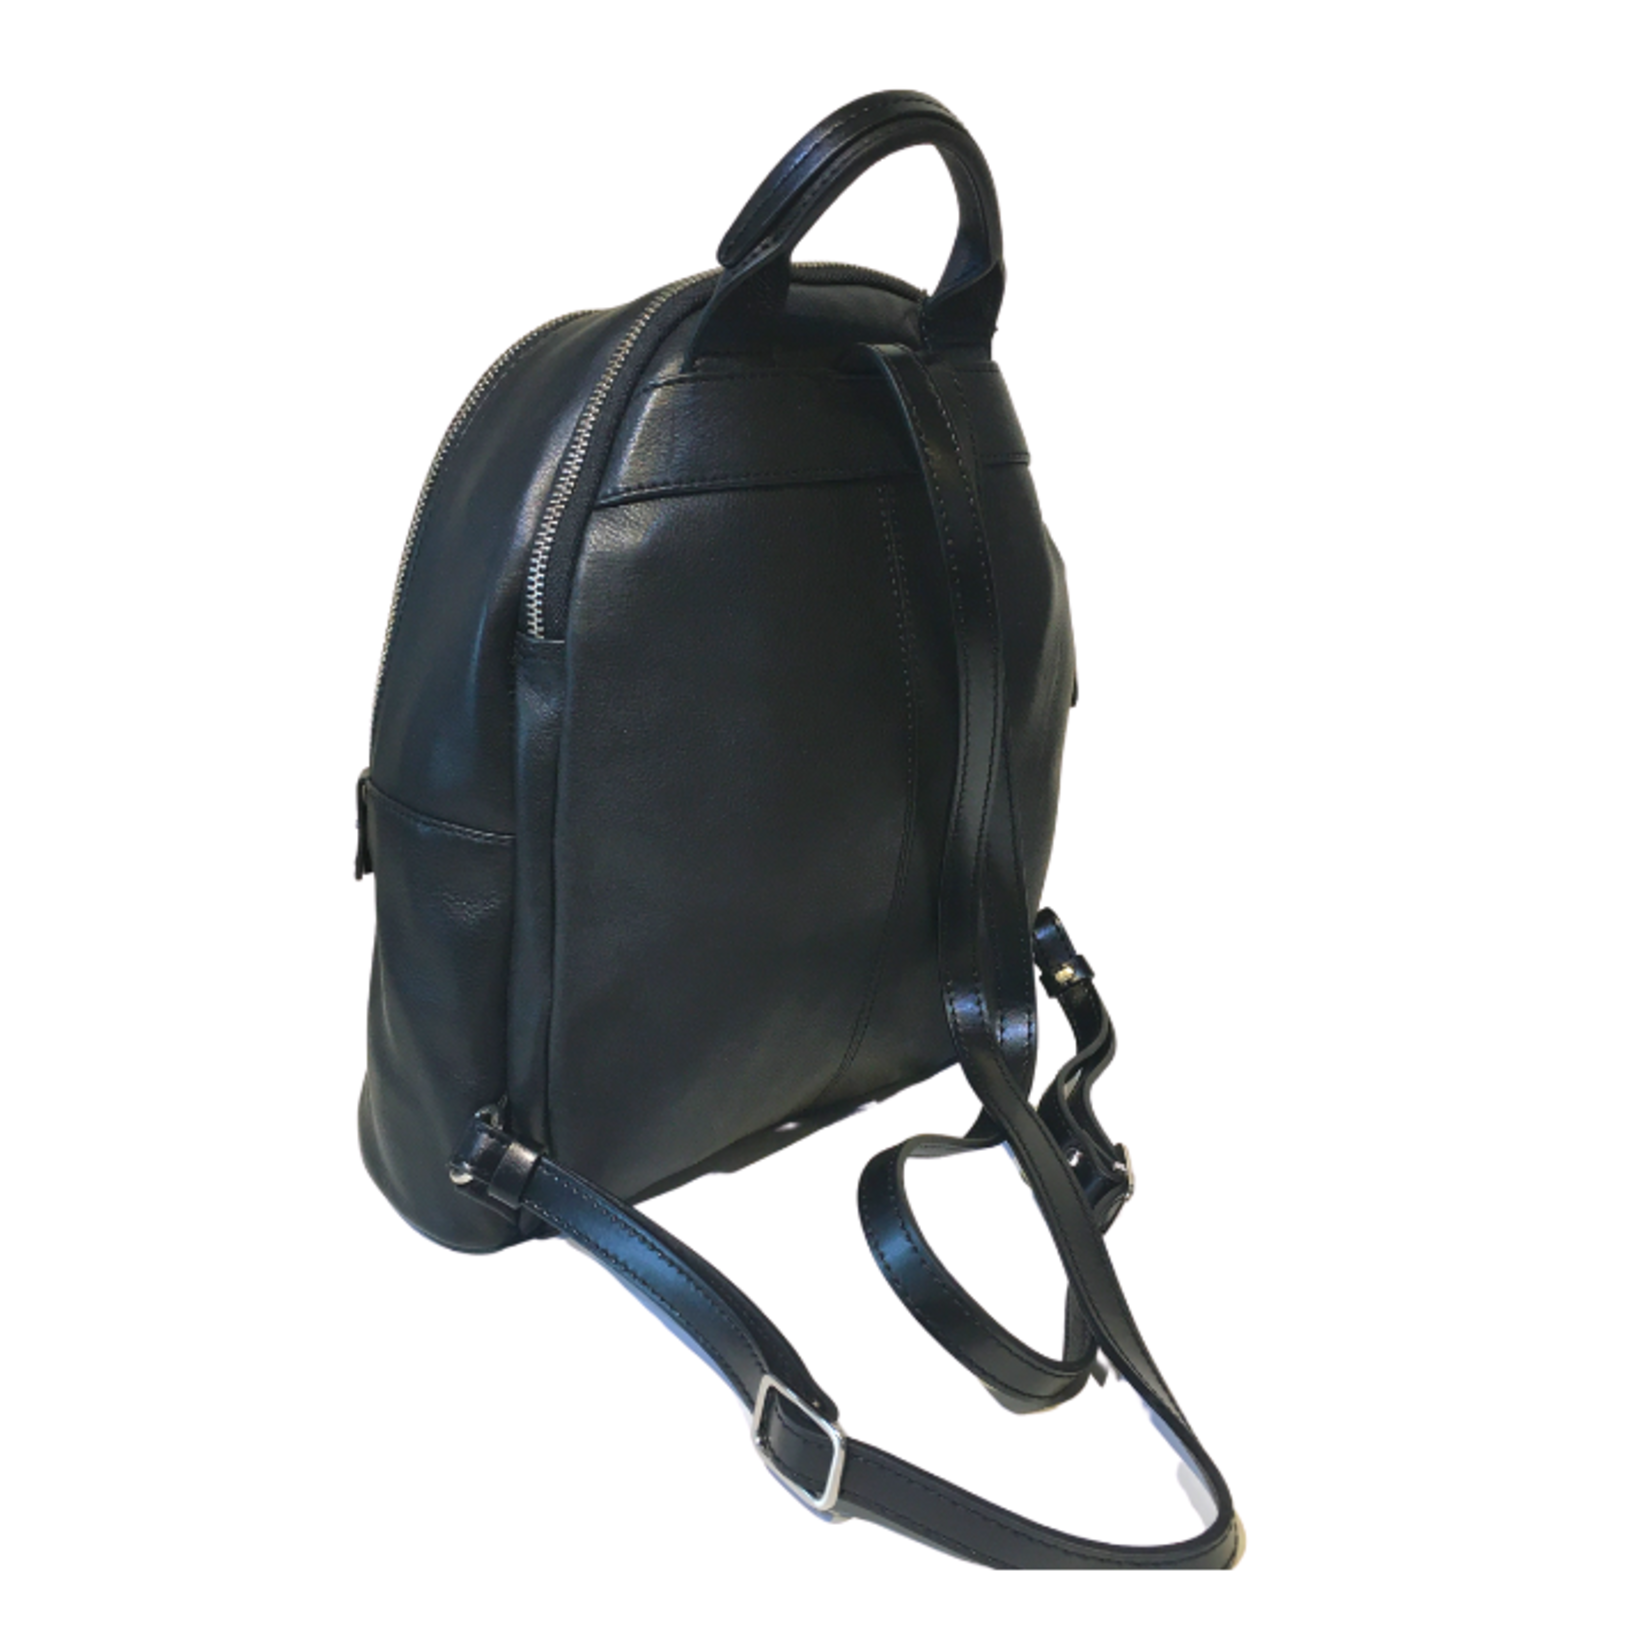 The Trend The Trend 583695 black backpack